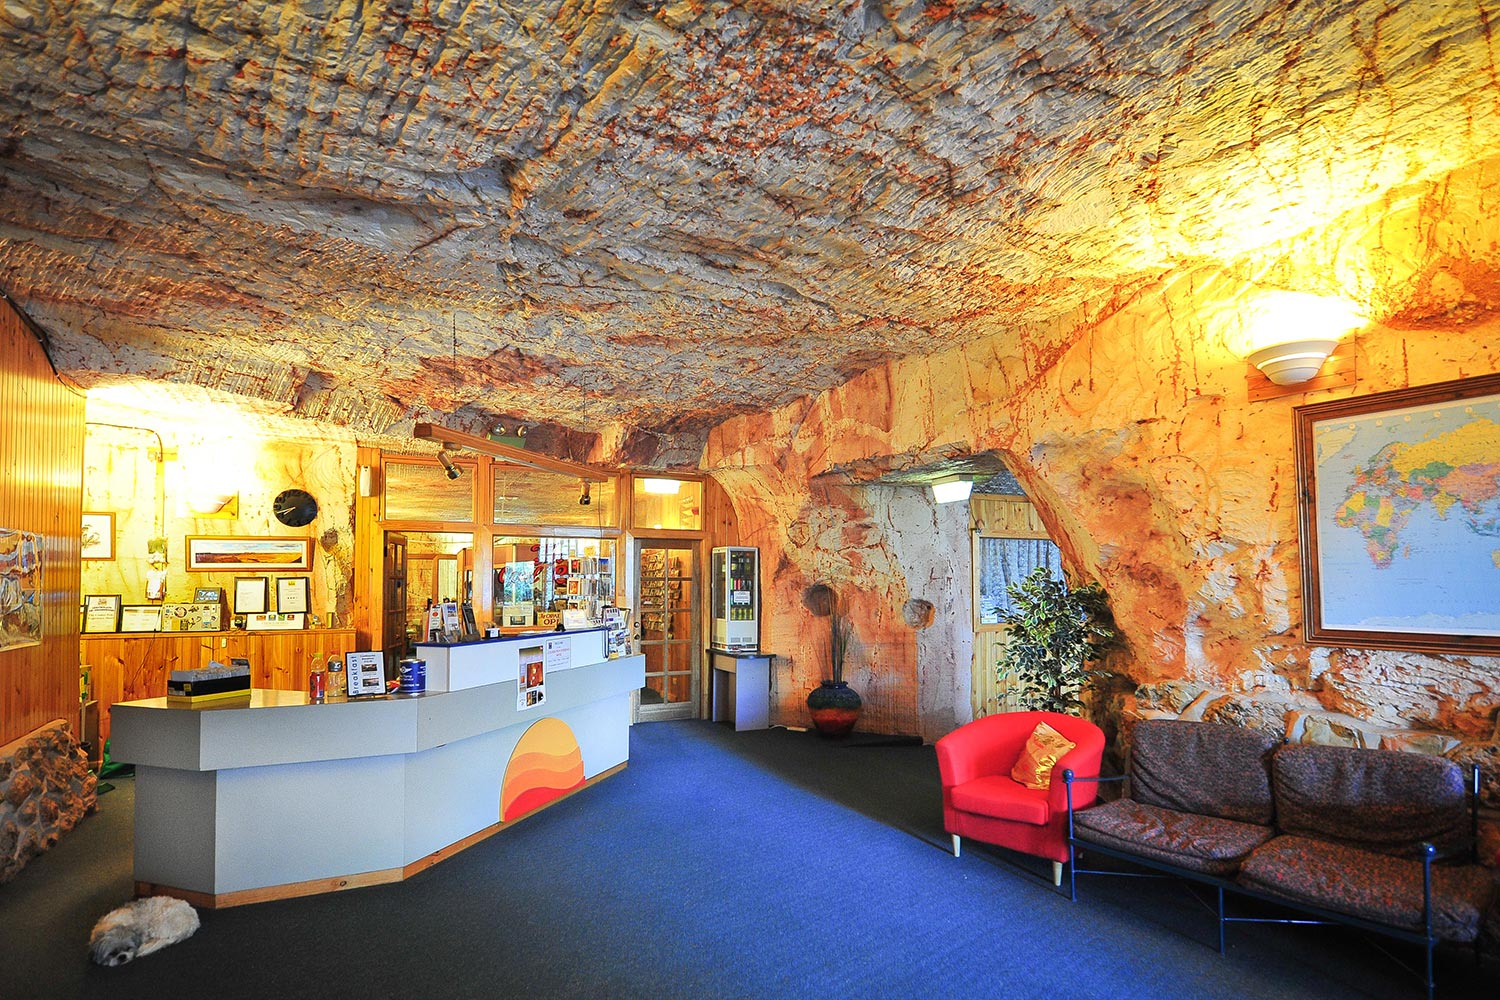 coober pedys residents live in underground dugouts lookout cave motel 0017